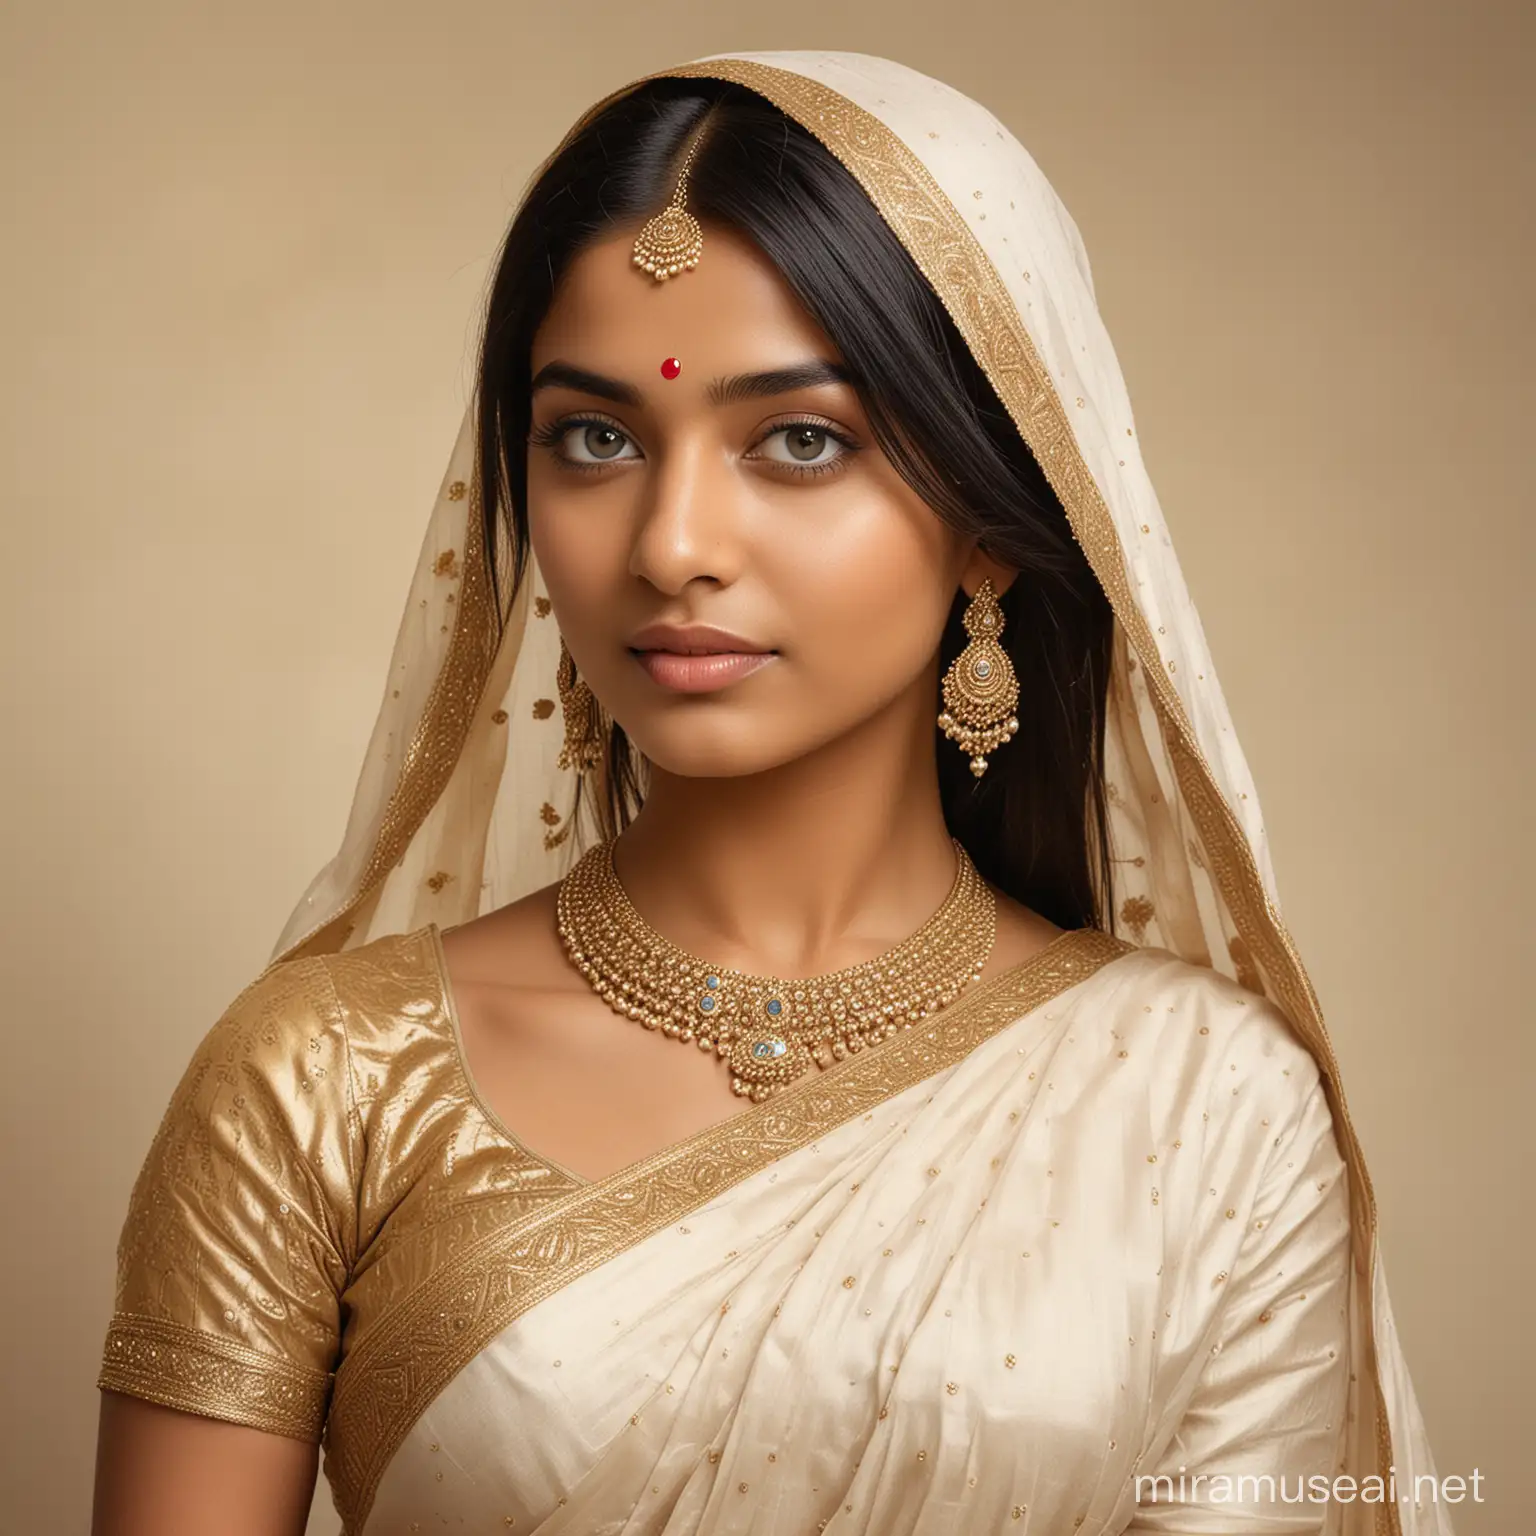 A photorealistic portrait of a young Indian lady aged 24, with mesmerizing blue eyes and sleek straight hair, her golden skin glowing against a backdrop of simplicity, draped in a regal saree with intricate golden detailswith flat white background